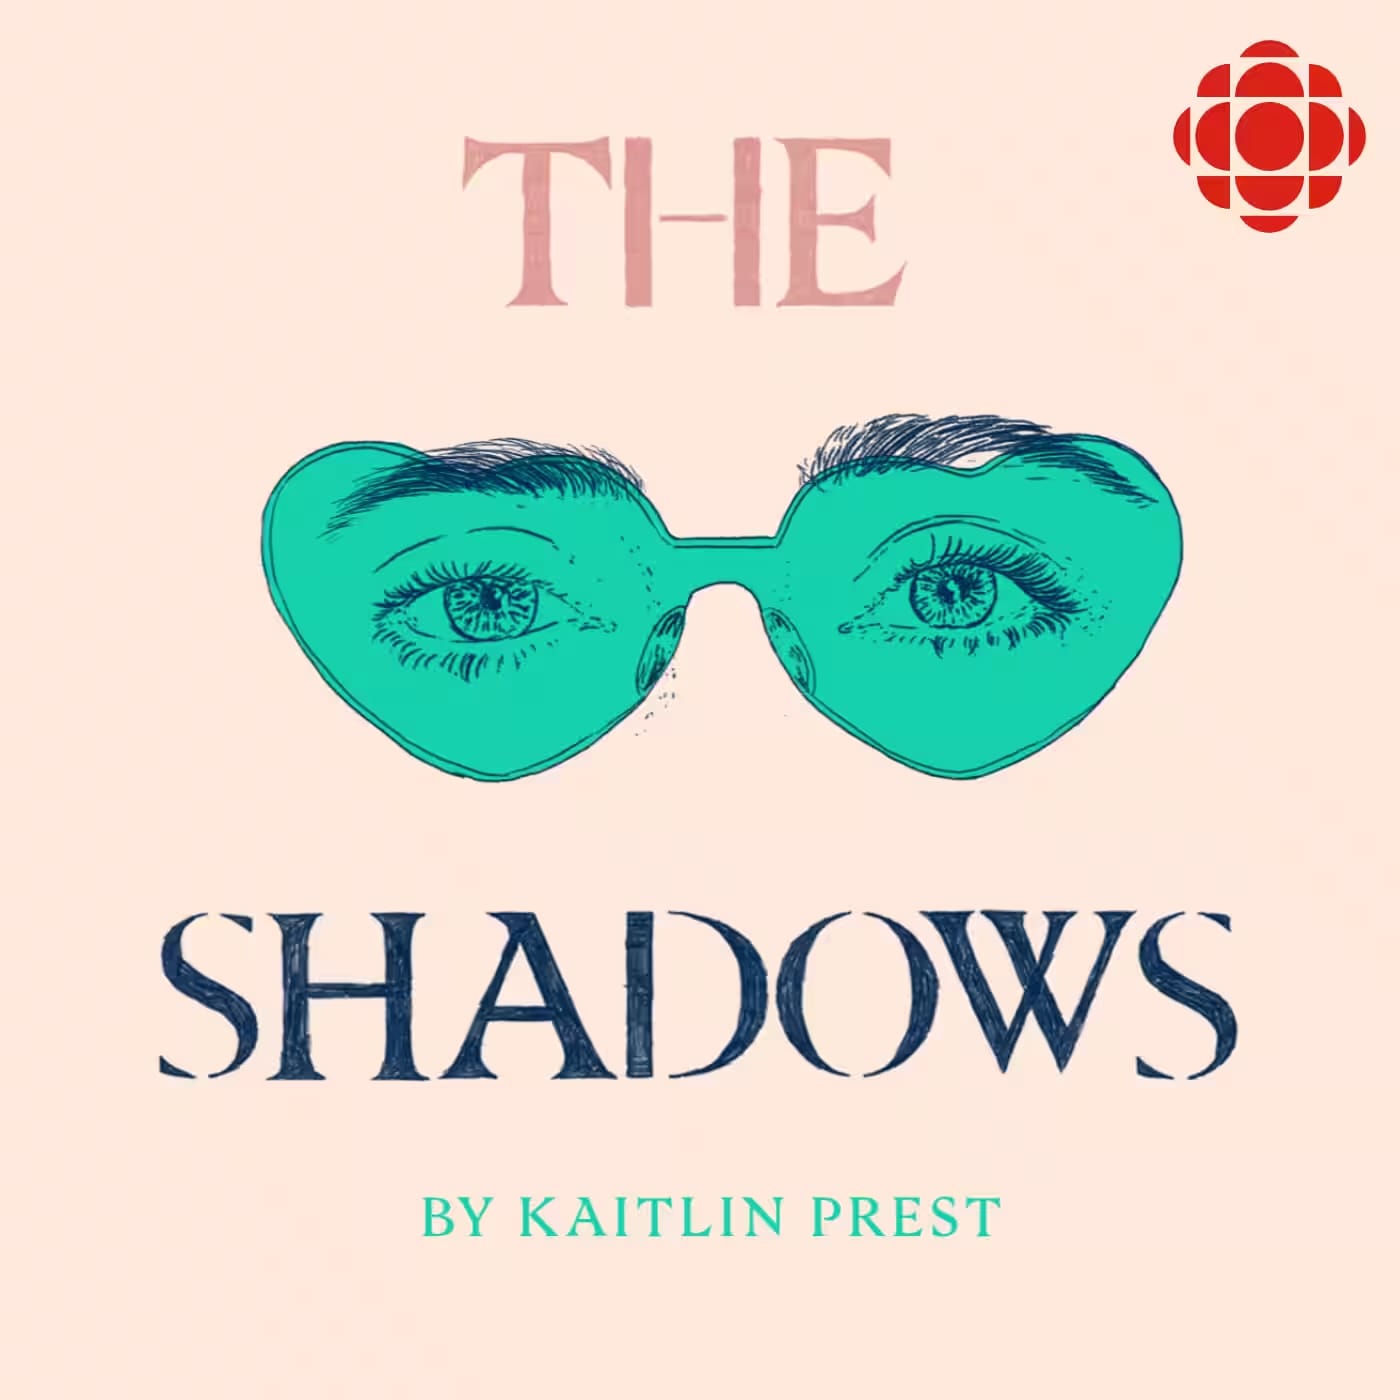 A pair of eyes behind heart-shaped sunglasses. "The Shadows by Kaitlin Prest"